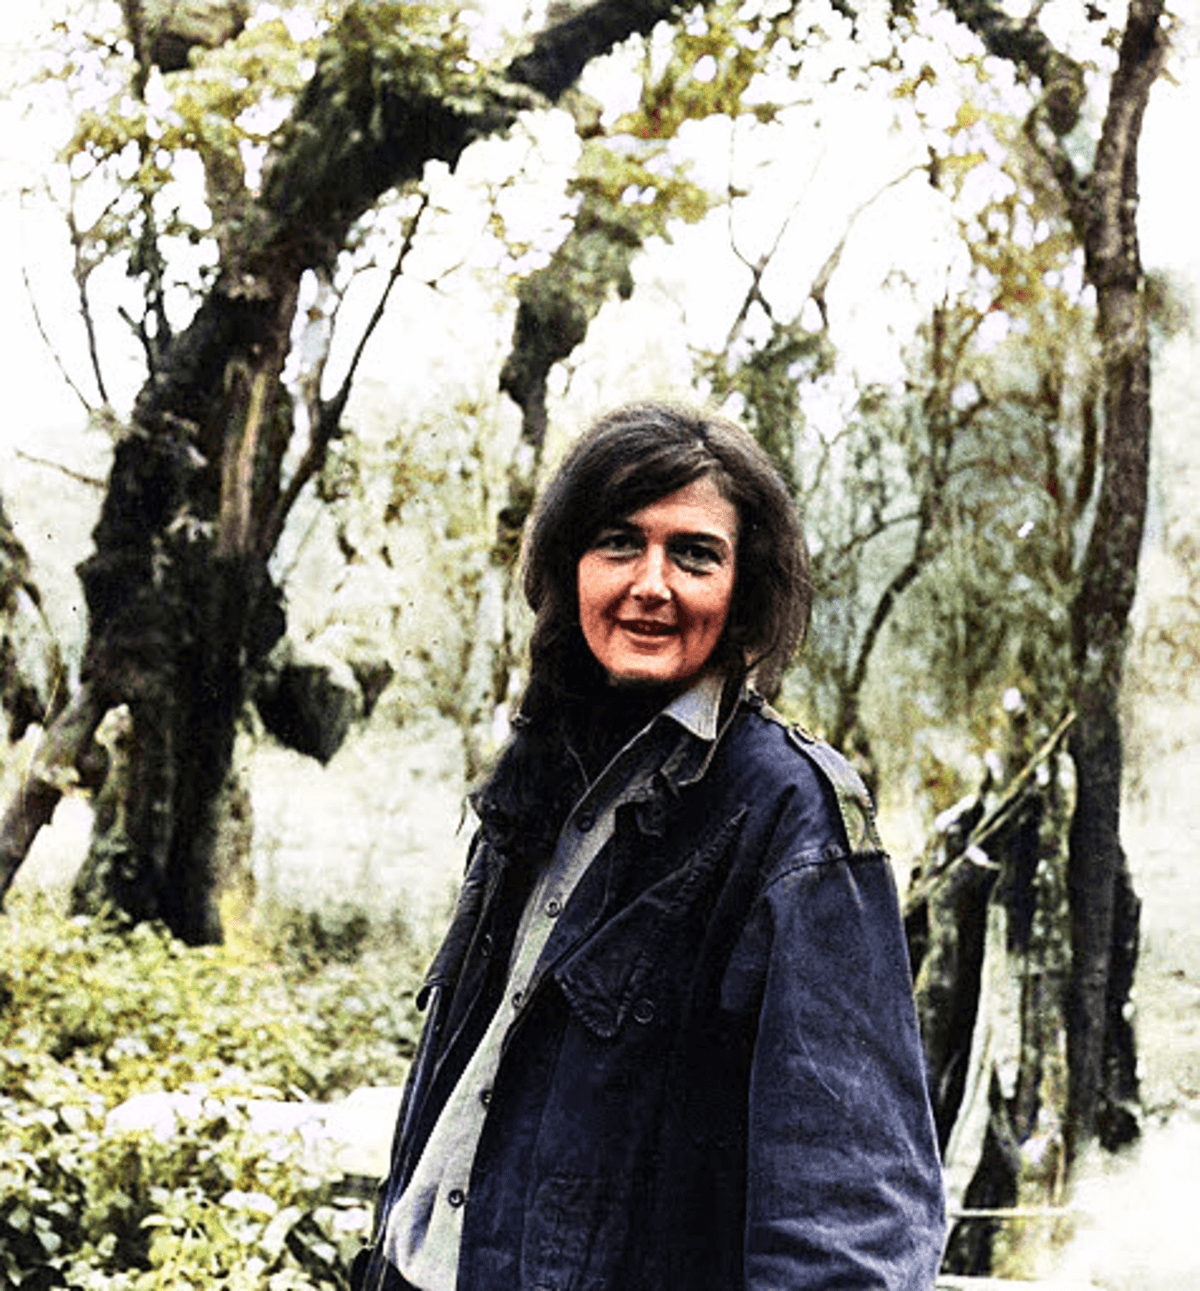 Dian Fossey posting in front of trees. Image credit: Courtesy of Dian Fossey Gorilla Fund